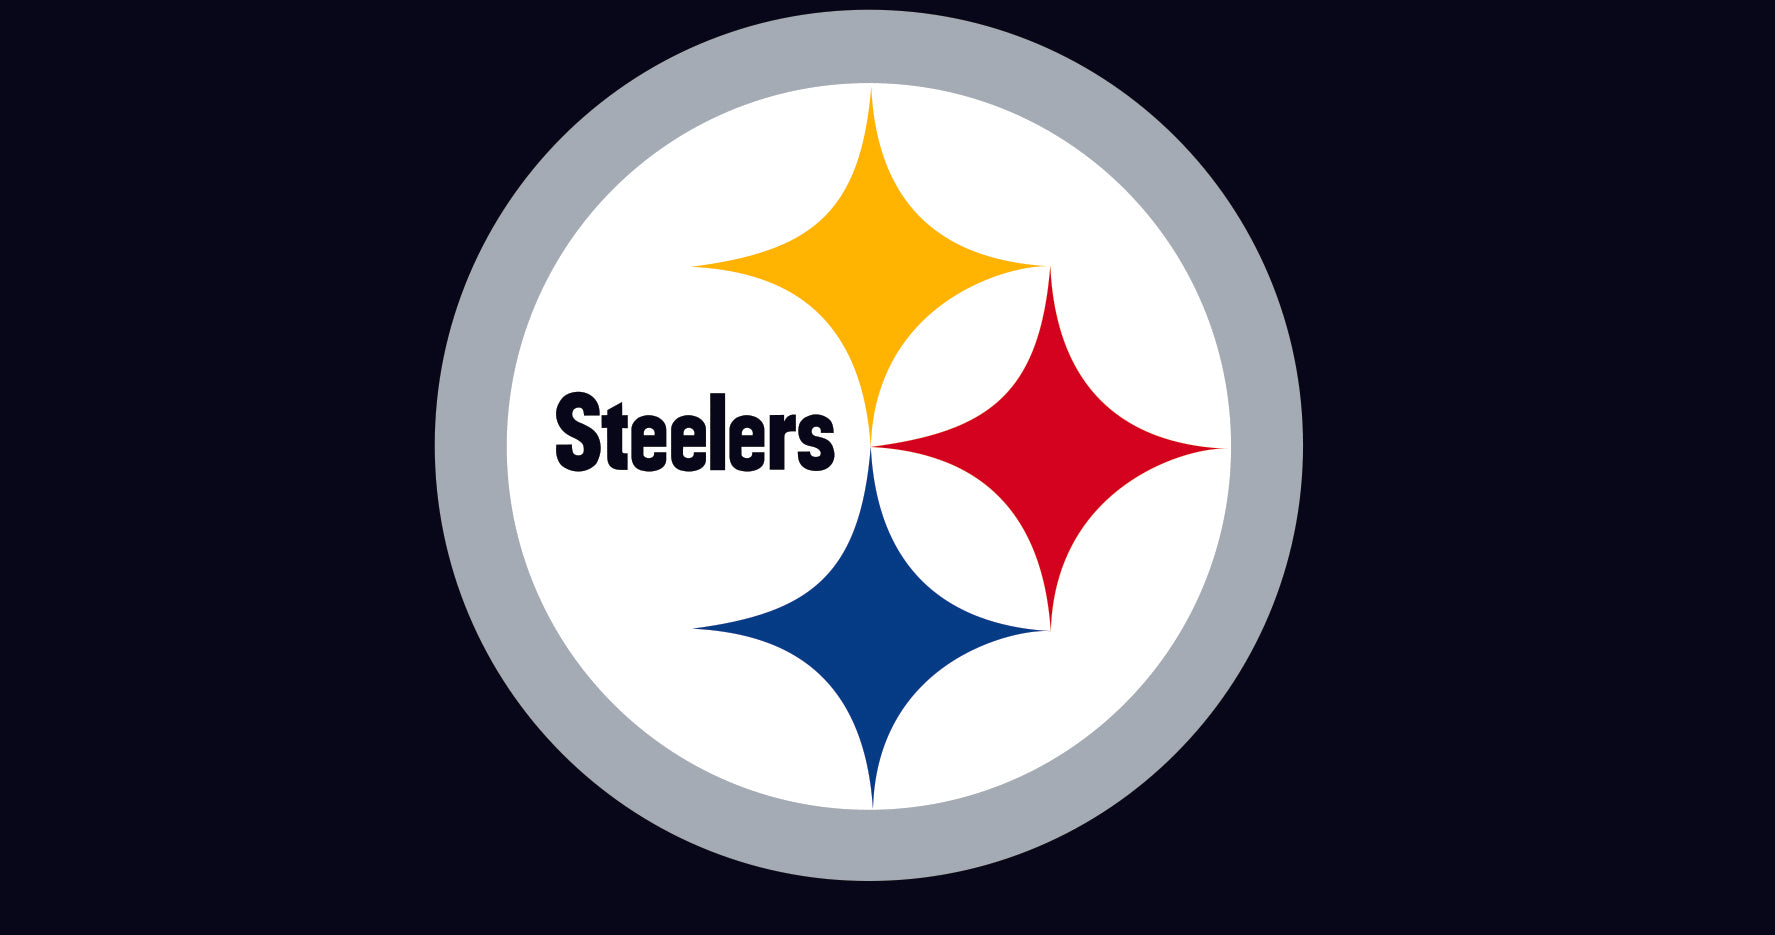 https://cdn.shopify.com/s/files/1/1100/3842/collections/Web_0007_Pittsburgh_Steelers.jpg?v=1598646104